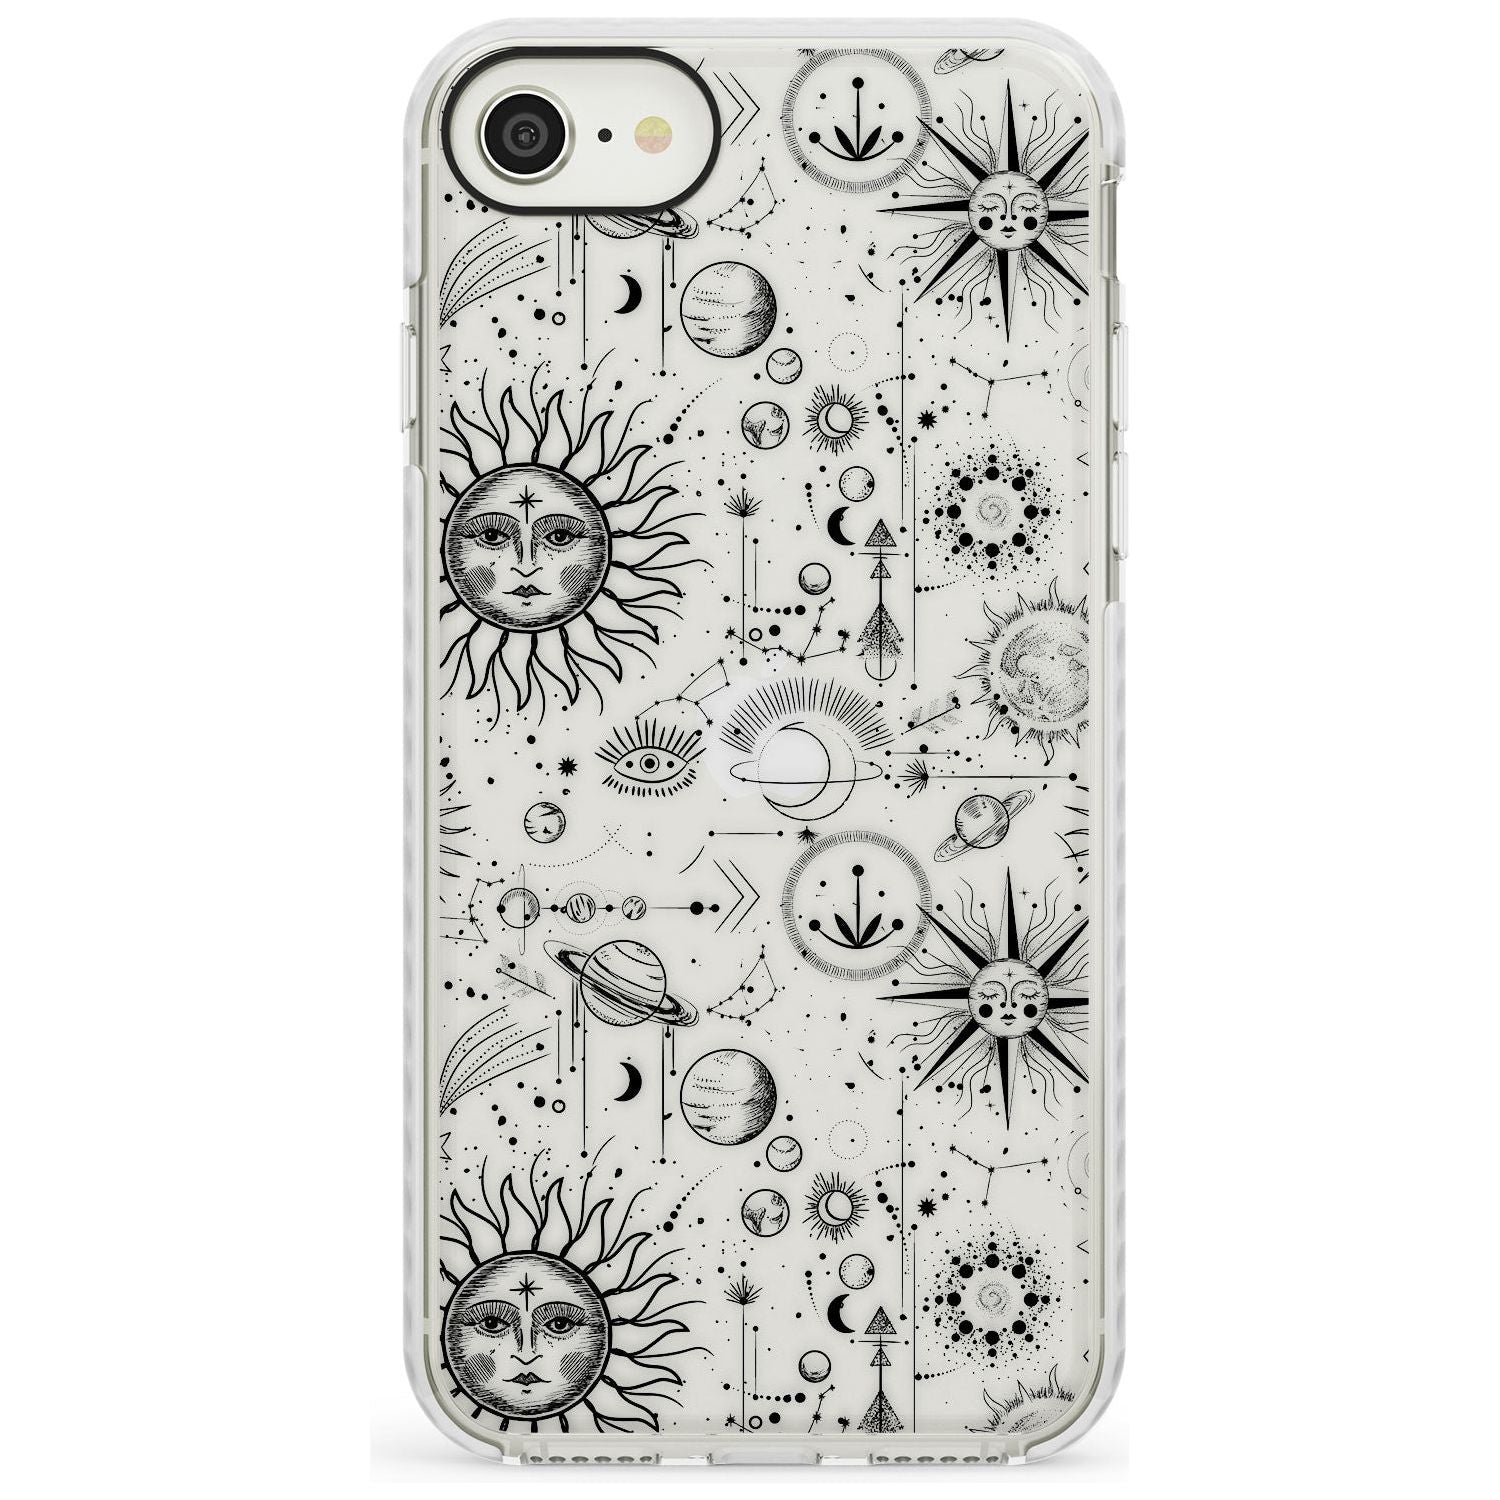 Suns & Planets Astrological Impact Phone Case for iPhone SE 8 7 Plus